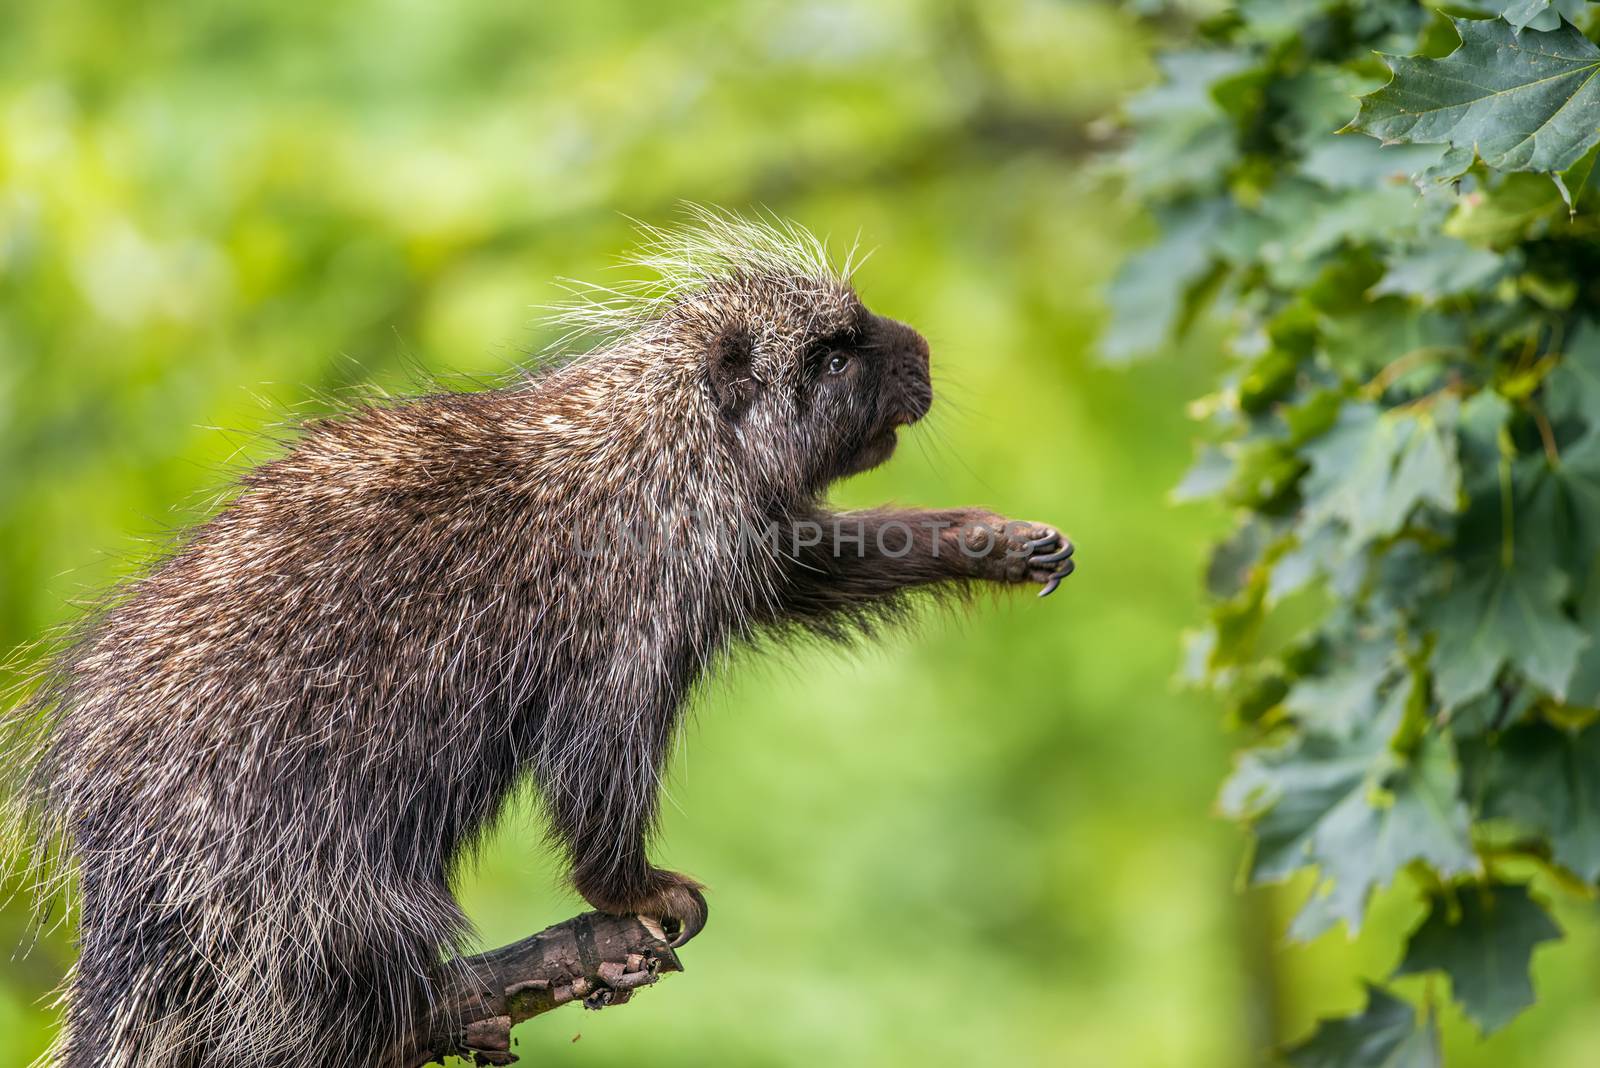 North American porcupine also known as Erethizon dorsatum reaching for leaves